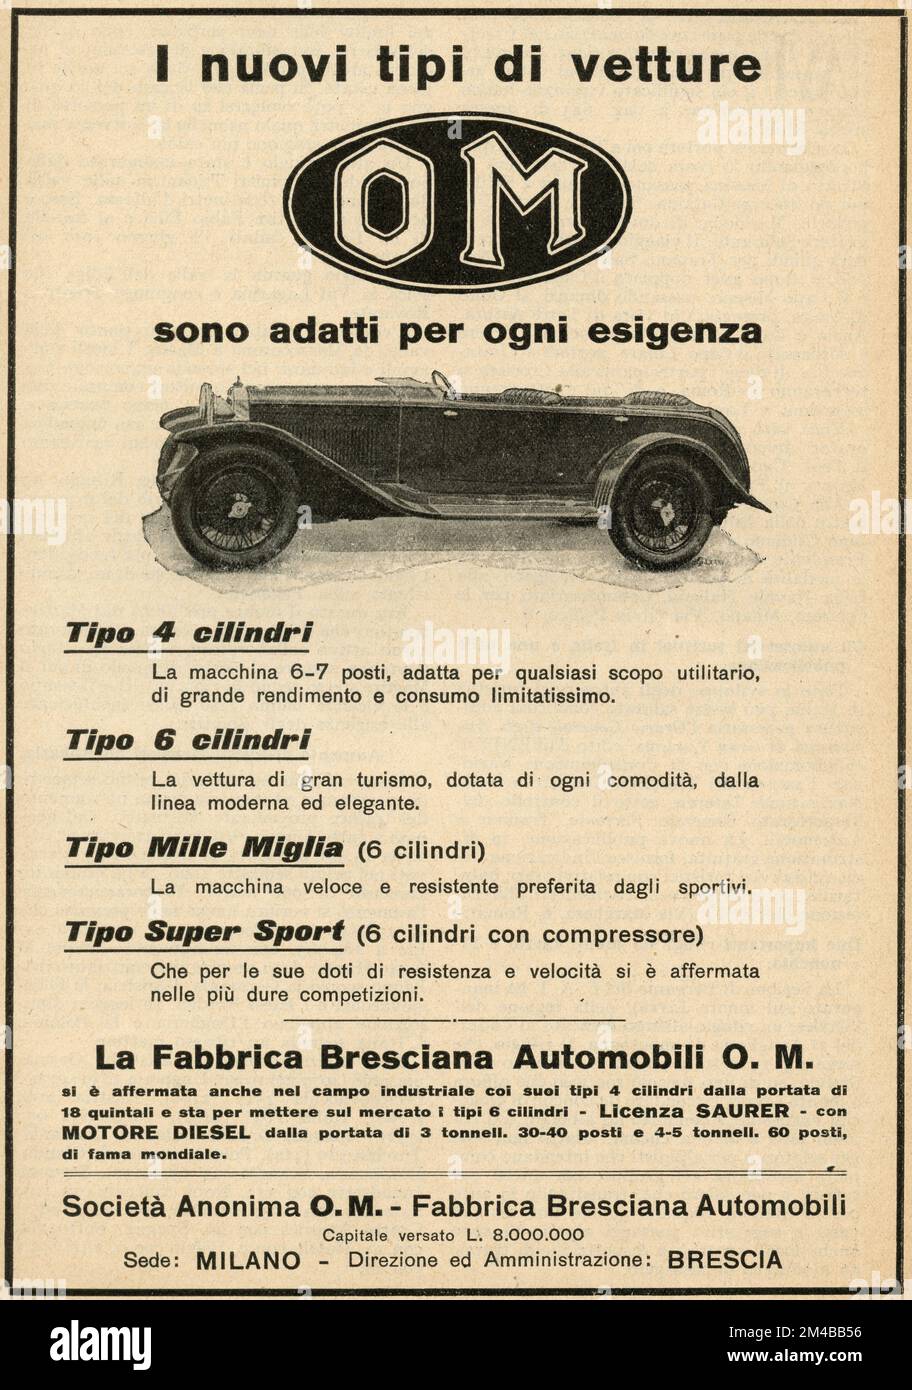 Vintage newspaper ad of OM car, Italy 1920s Stock Photo